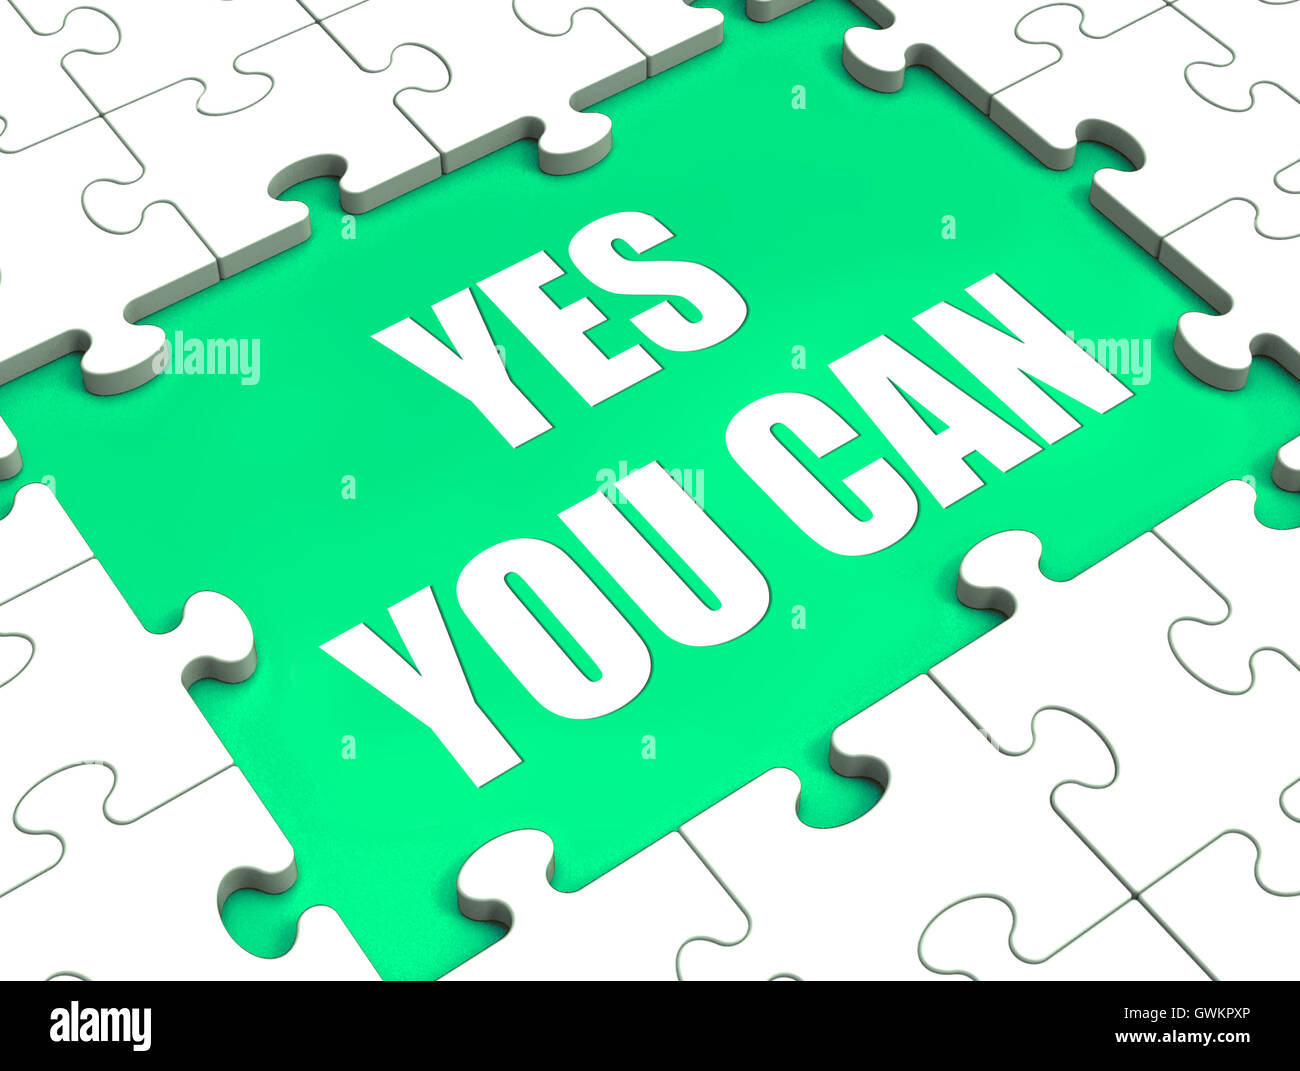 Yes You Can Puzzle Shows Inspiration Motivation And Achievement Stock Photo